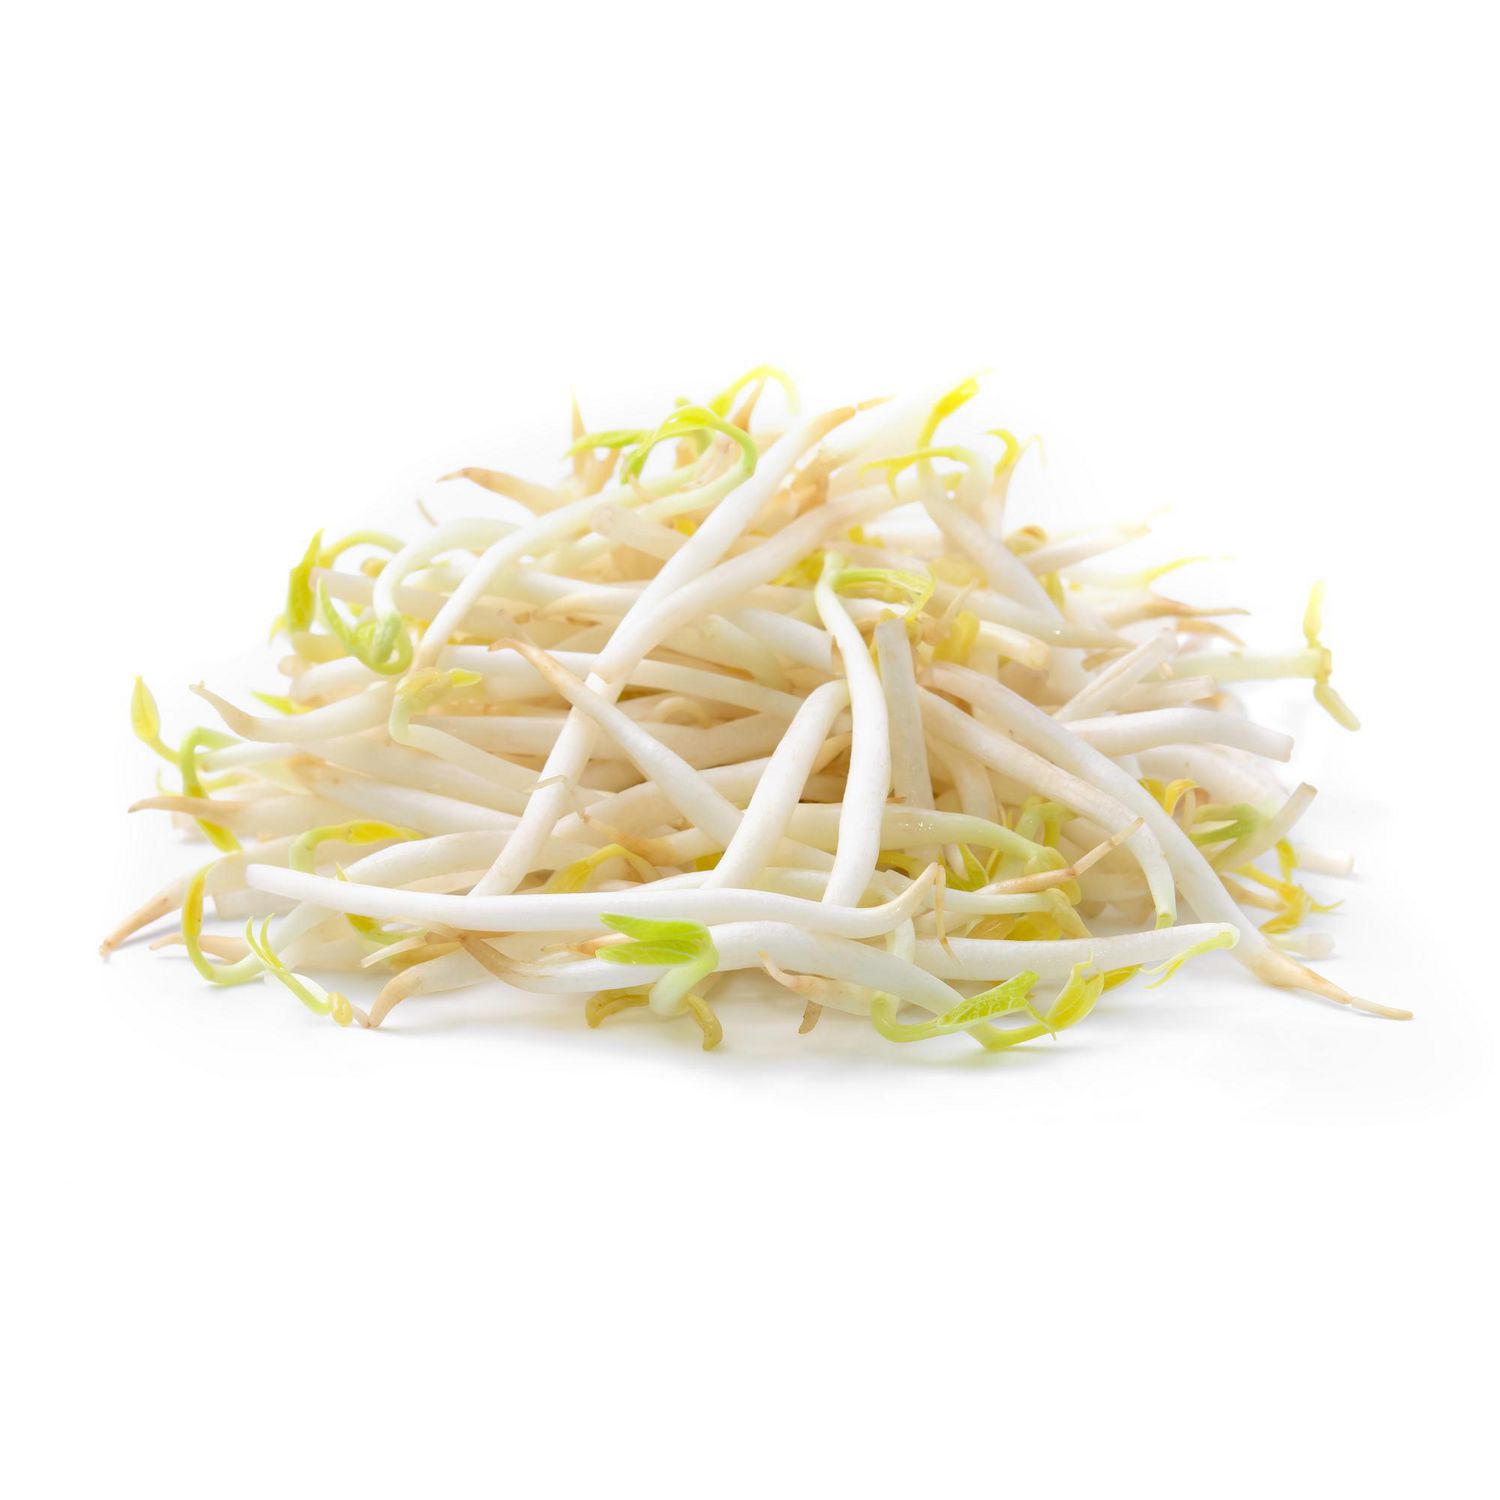 Bean sprouts help clear heat and soothe the throat for people with hoarseness